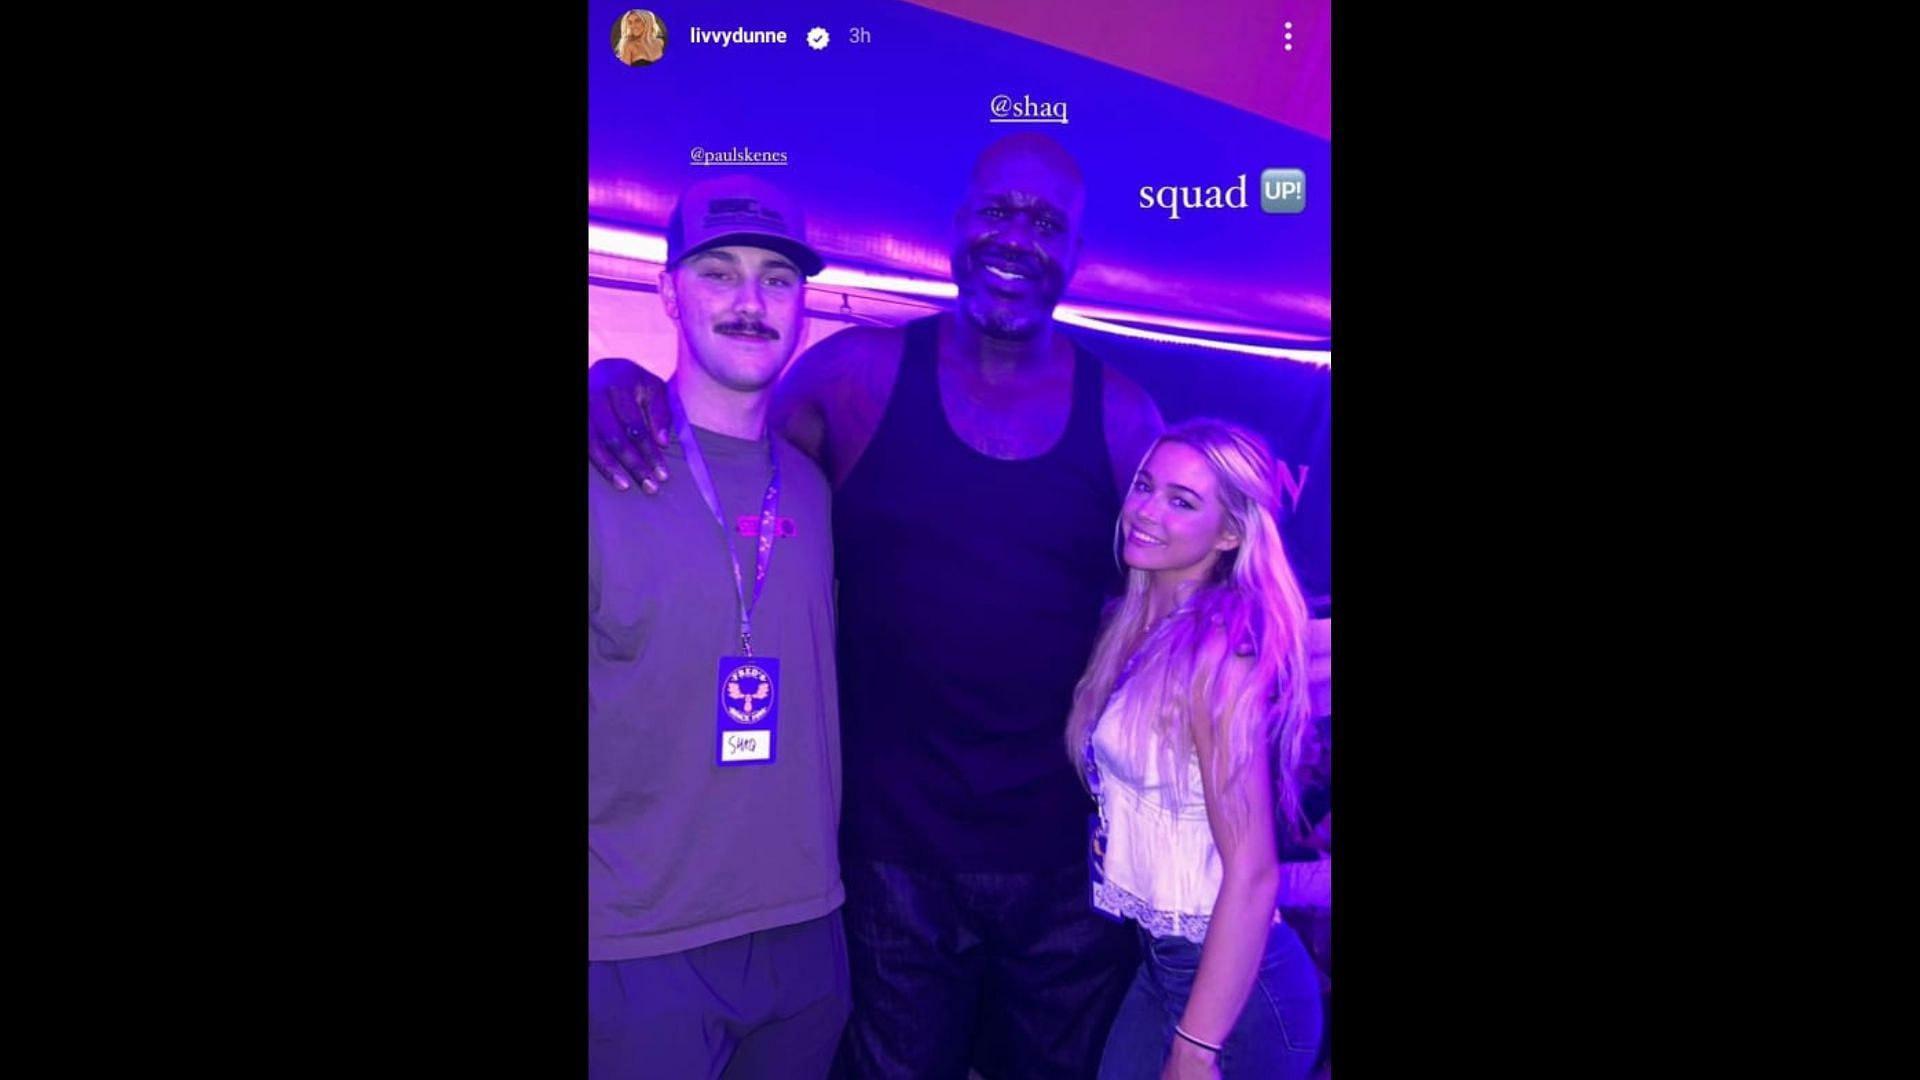 Olivia and Paul with Shaq